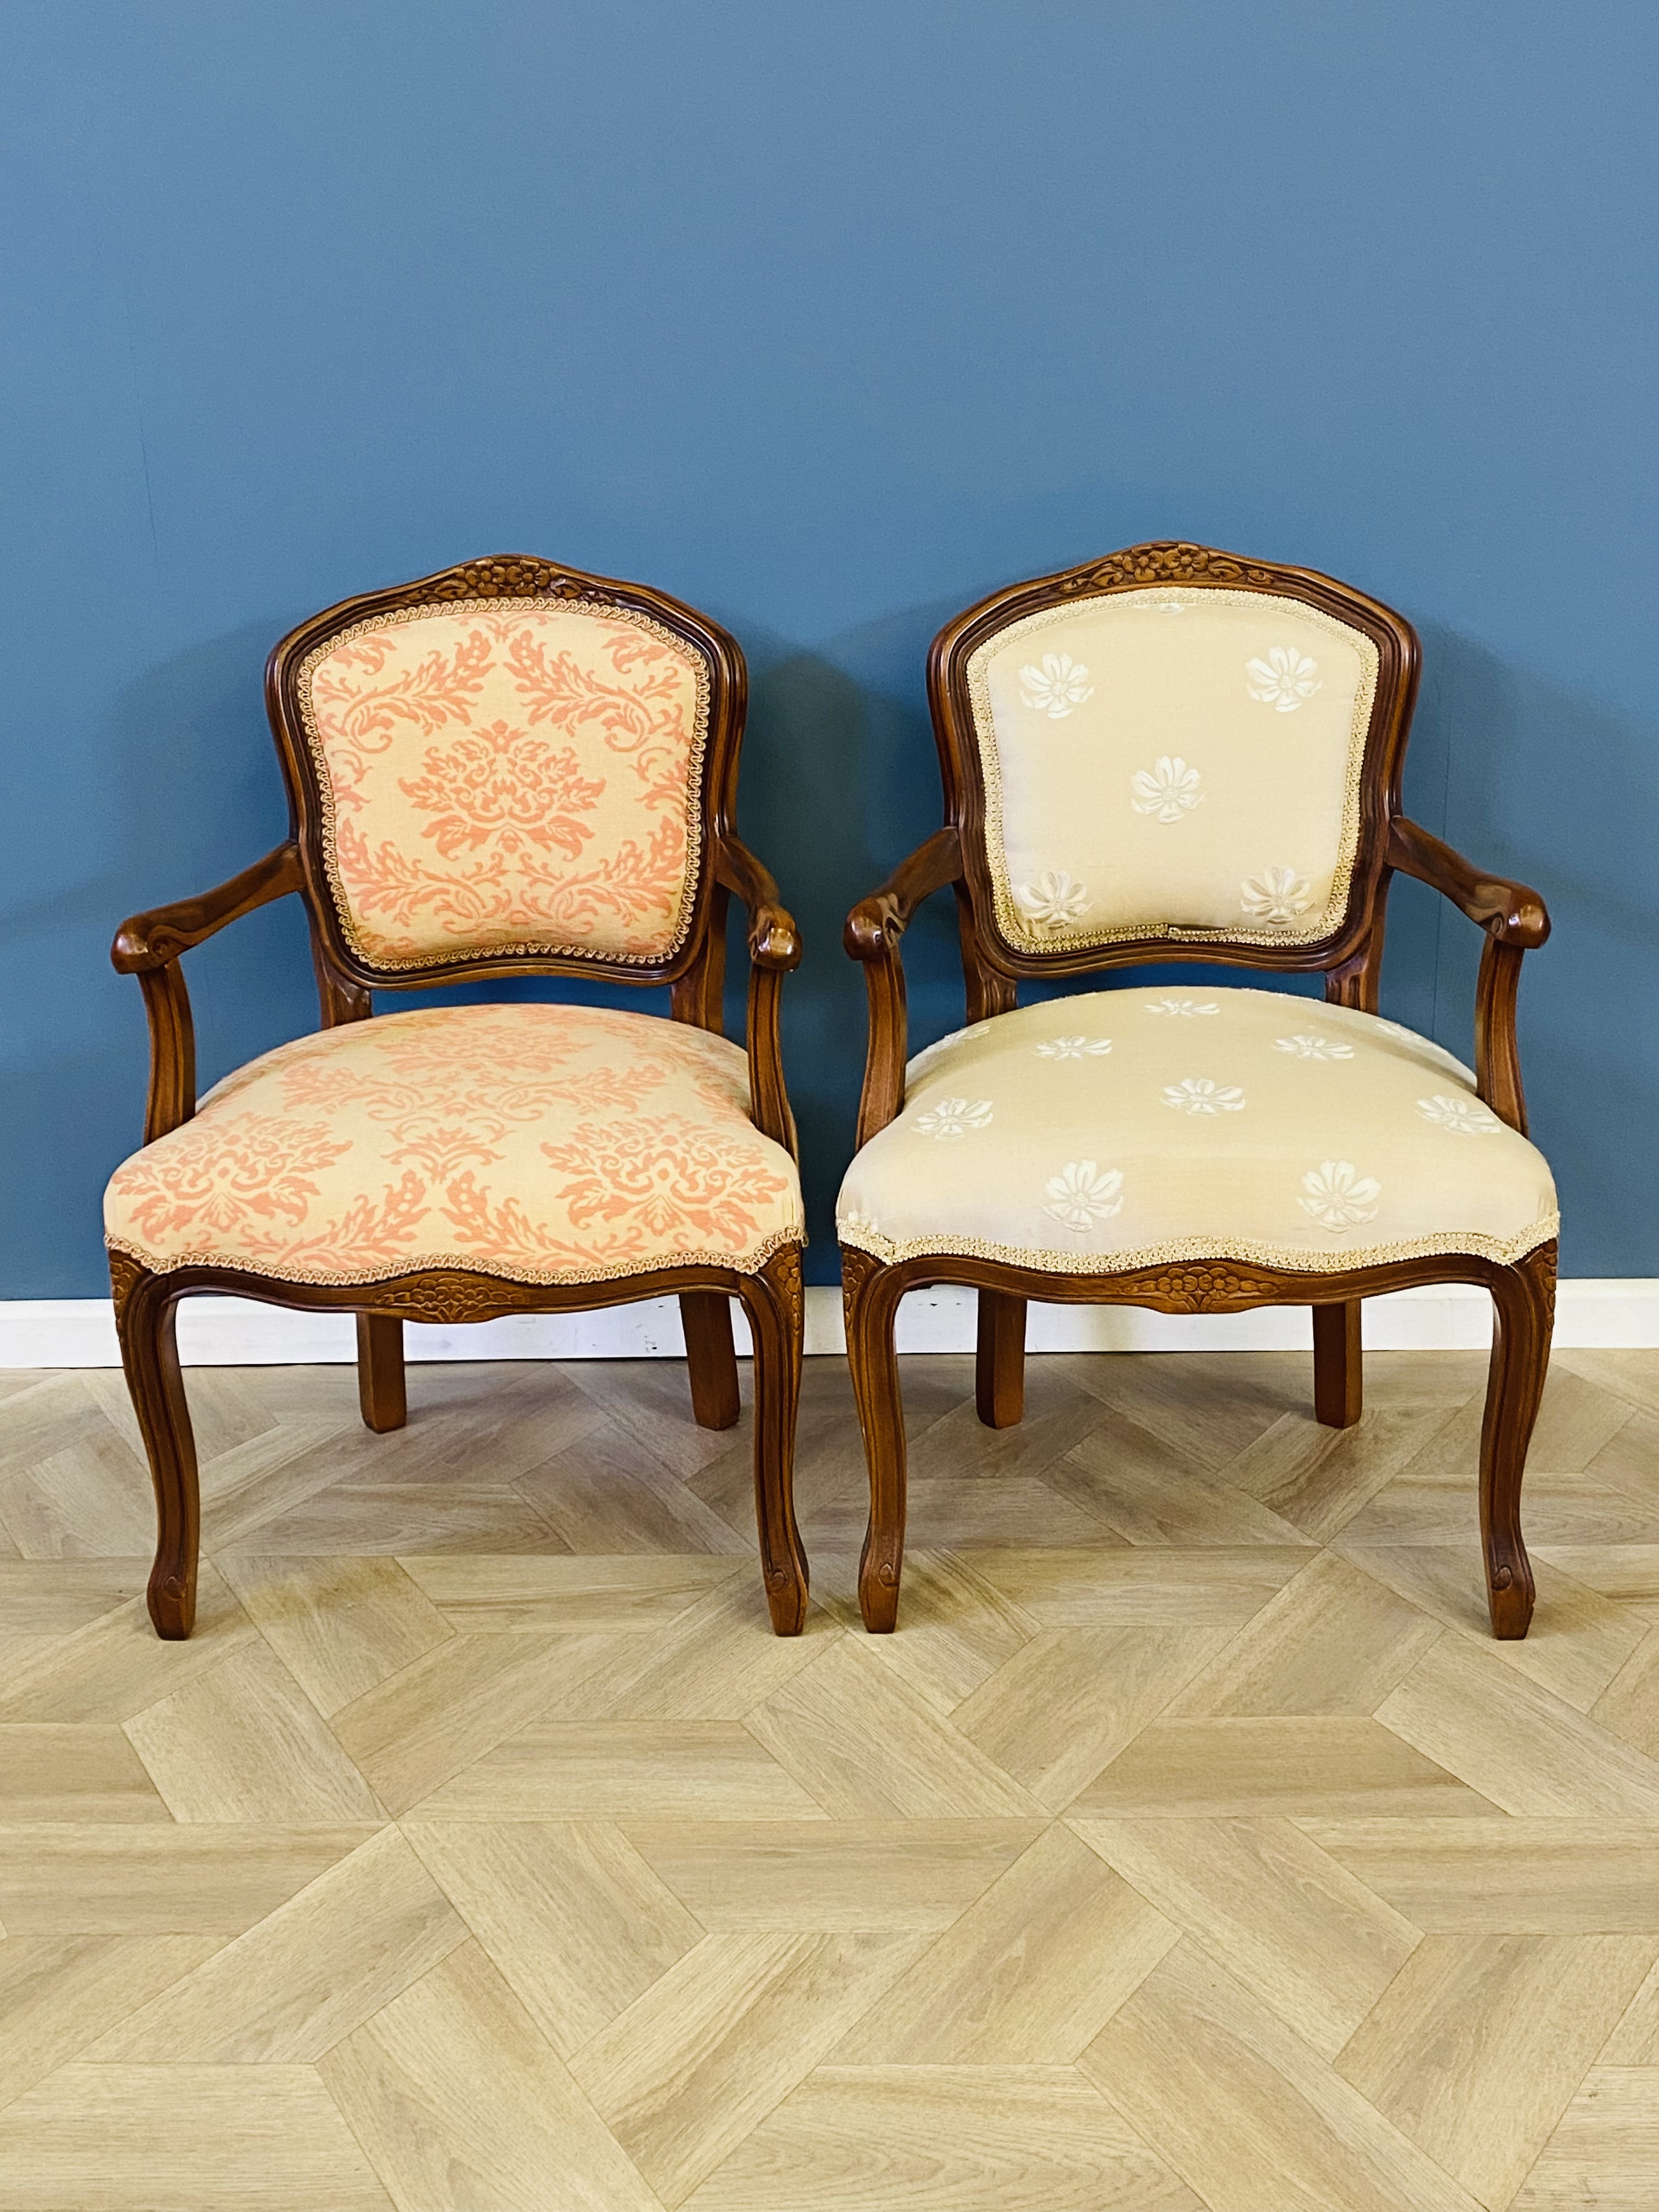 Pair of reproduction French style upholstered elbow chairs